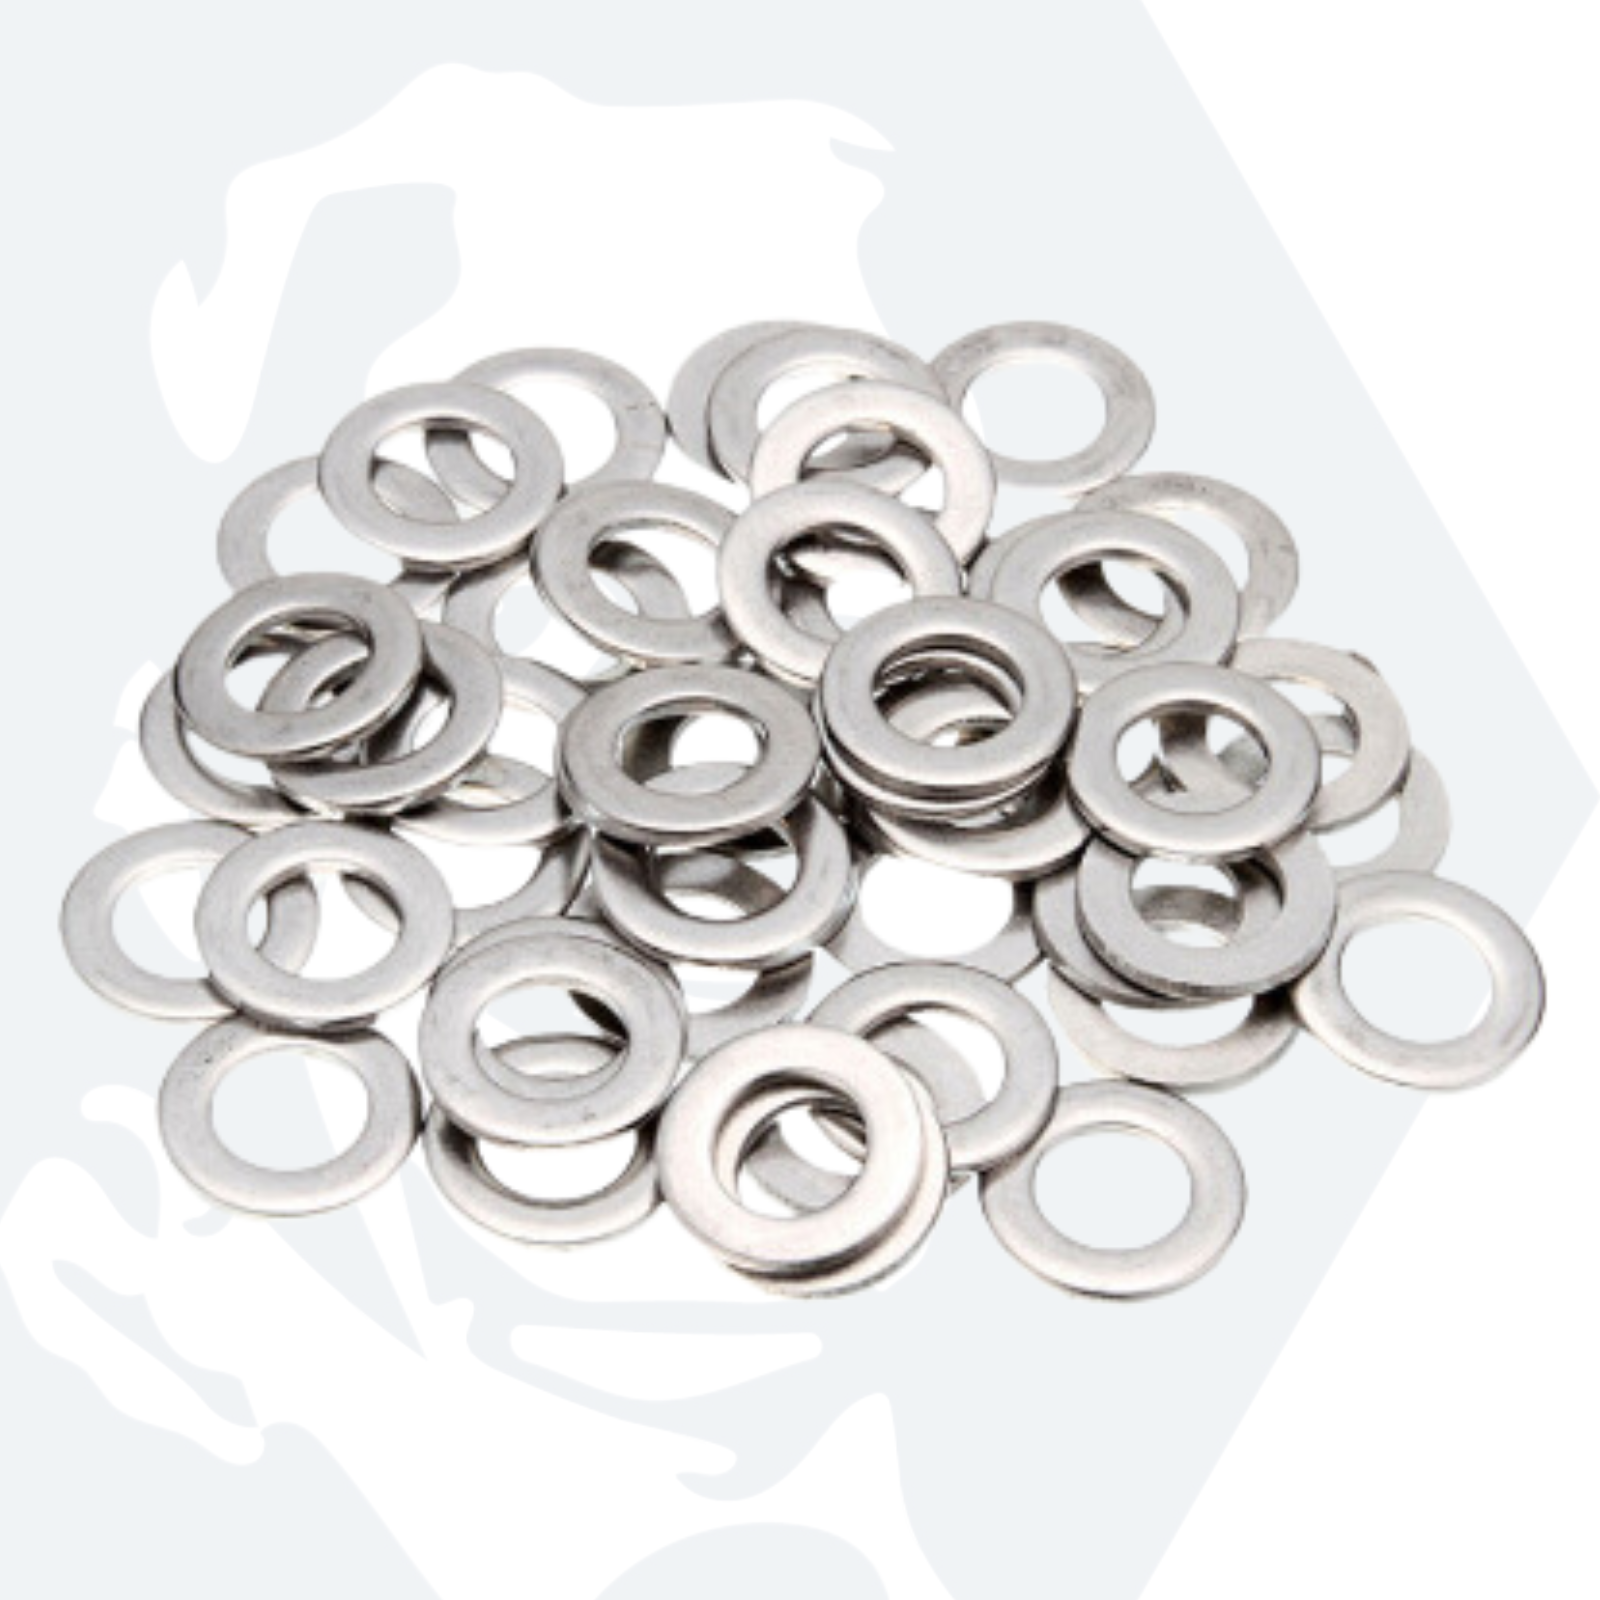 M1.6 Form A Flat Washers (DIN 125) - Stainless Steel (A2)